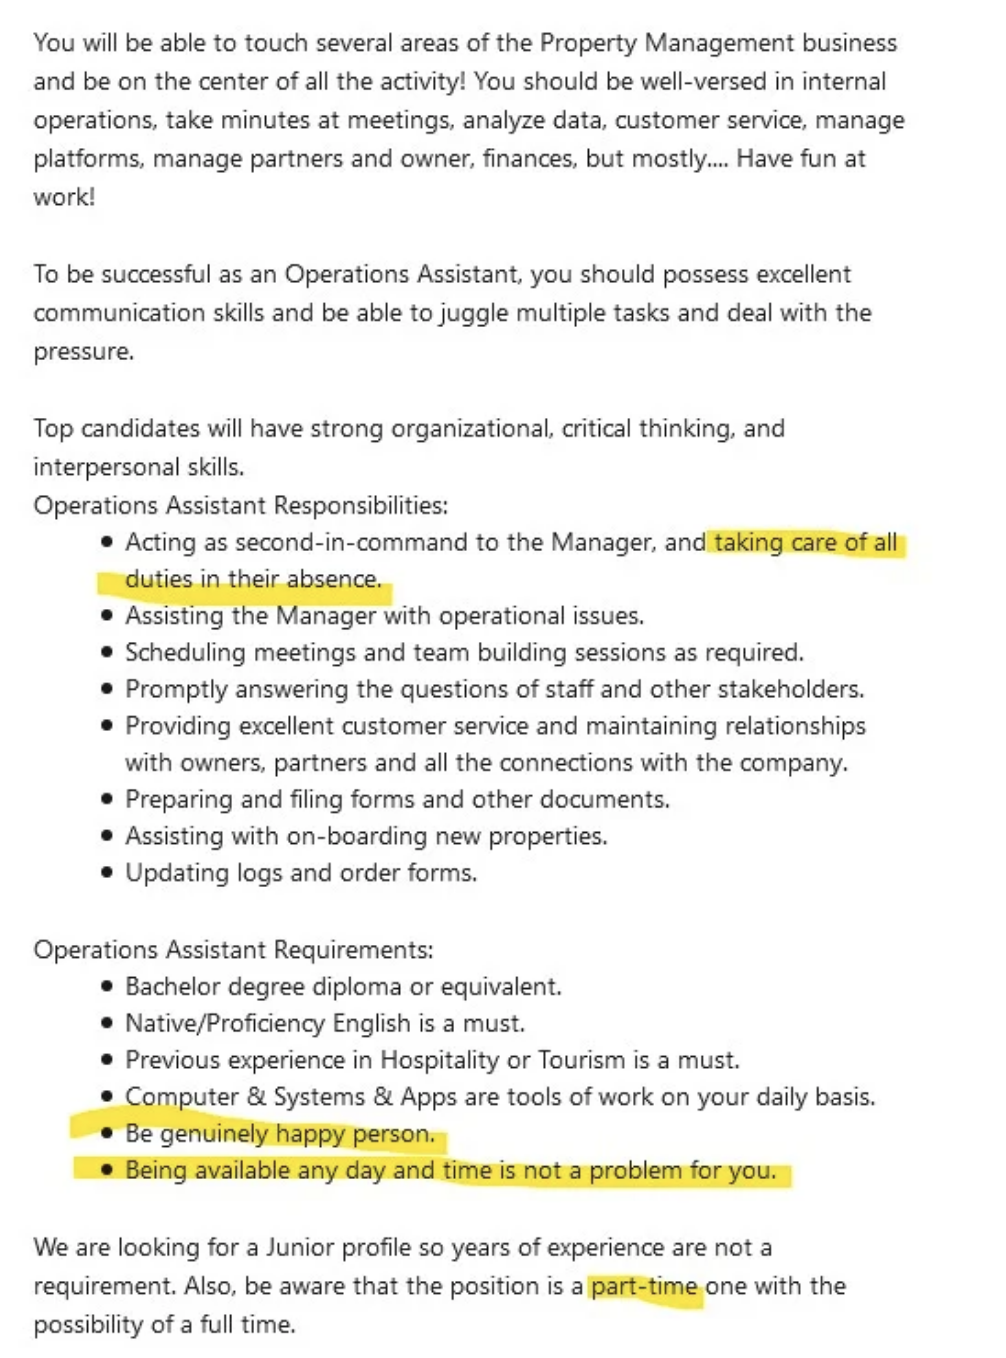 job description saying you need to act as second-in-command to manager and take care of all duties in their absence, and be a genuinely happy person who is available at any day, any time - but it&#x27;s a part time job